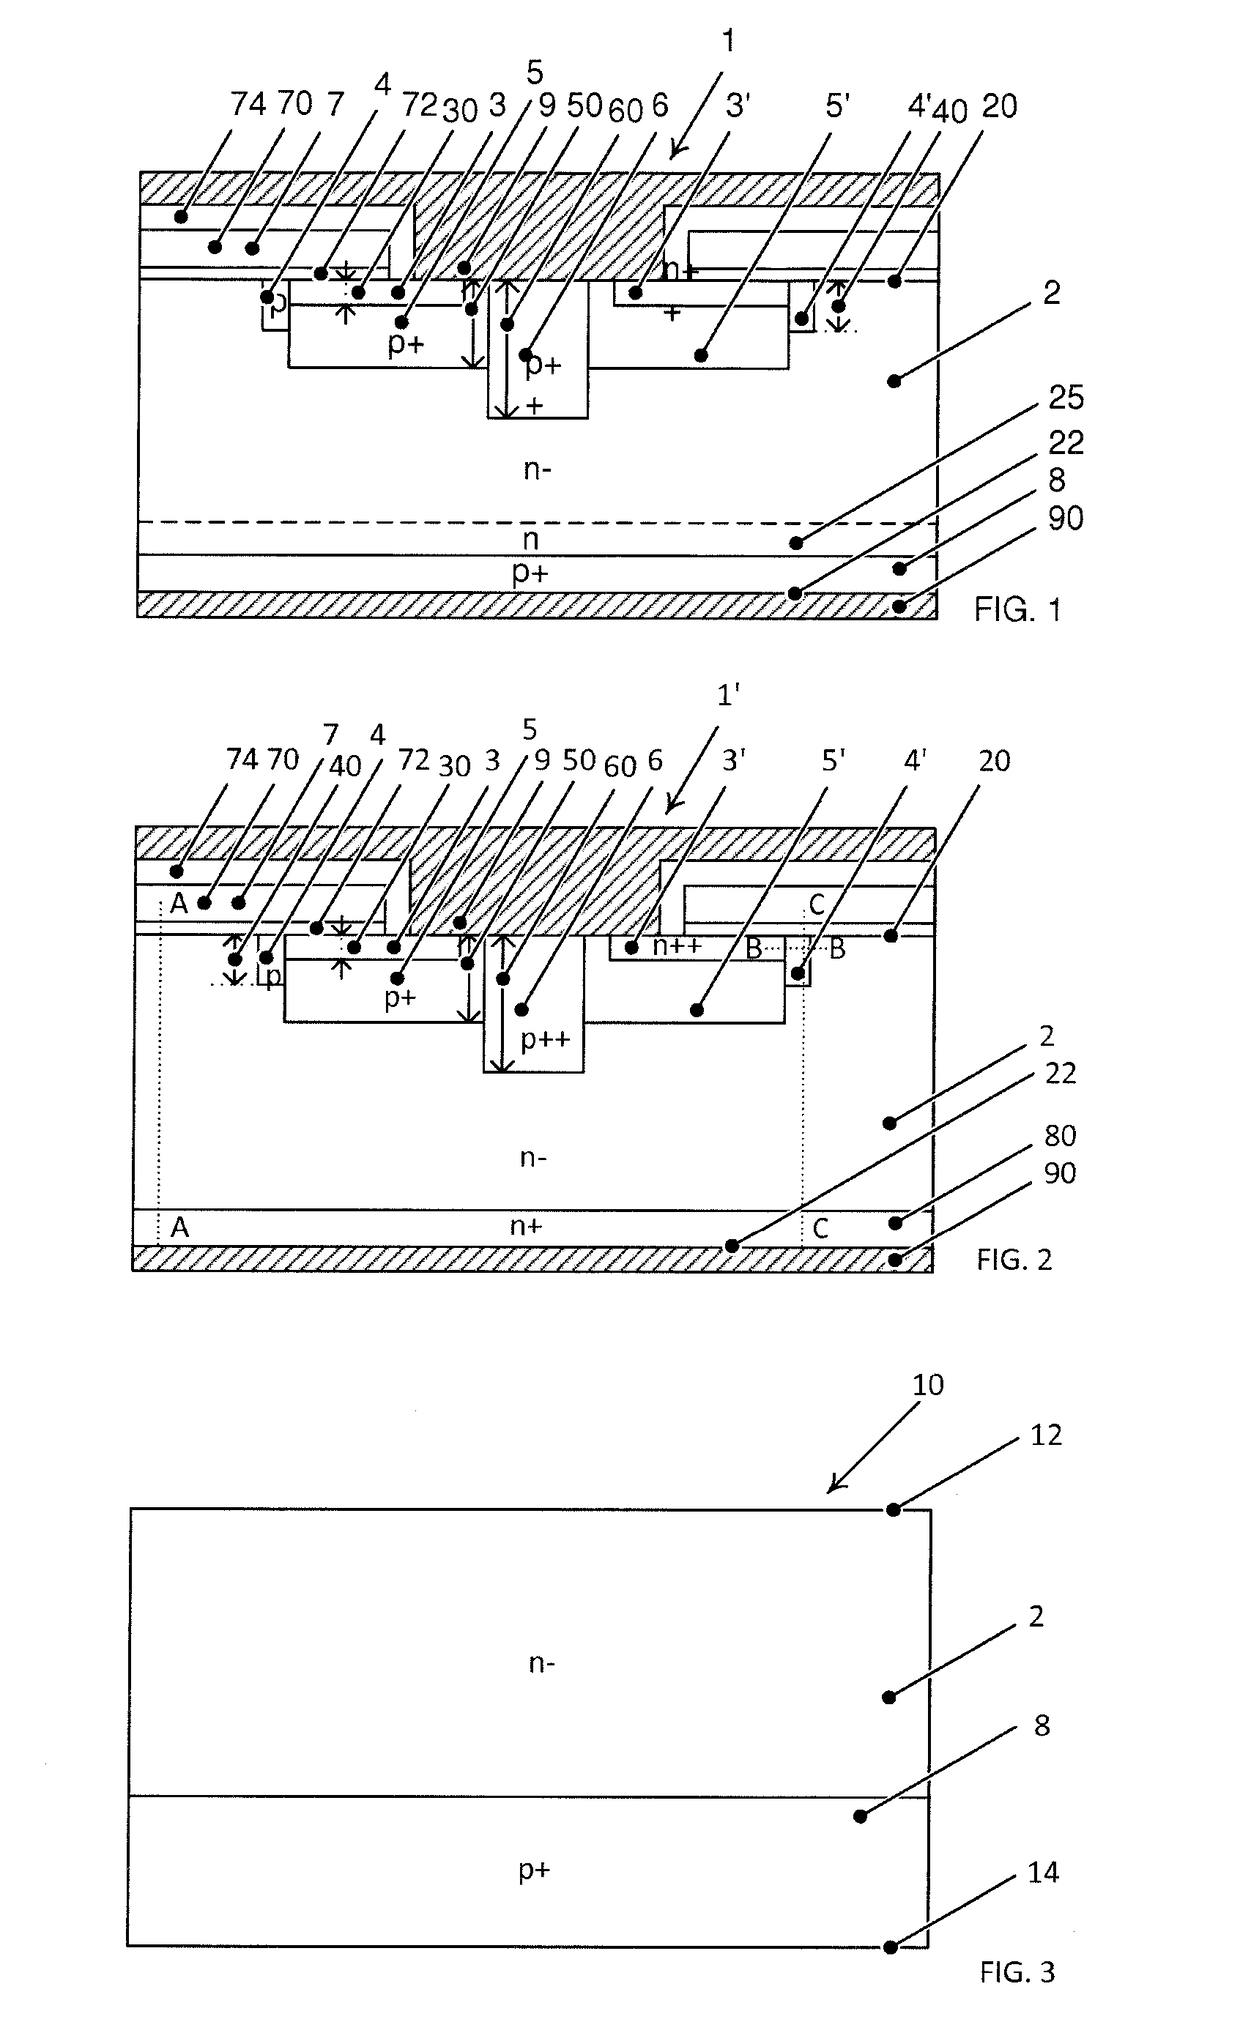 Semiconductor device and method for manufacturing such a semiconductor device